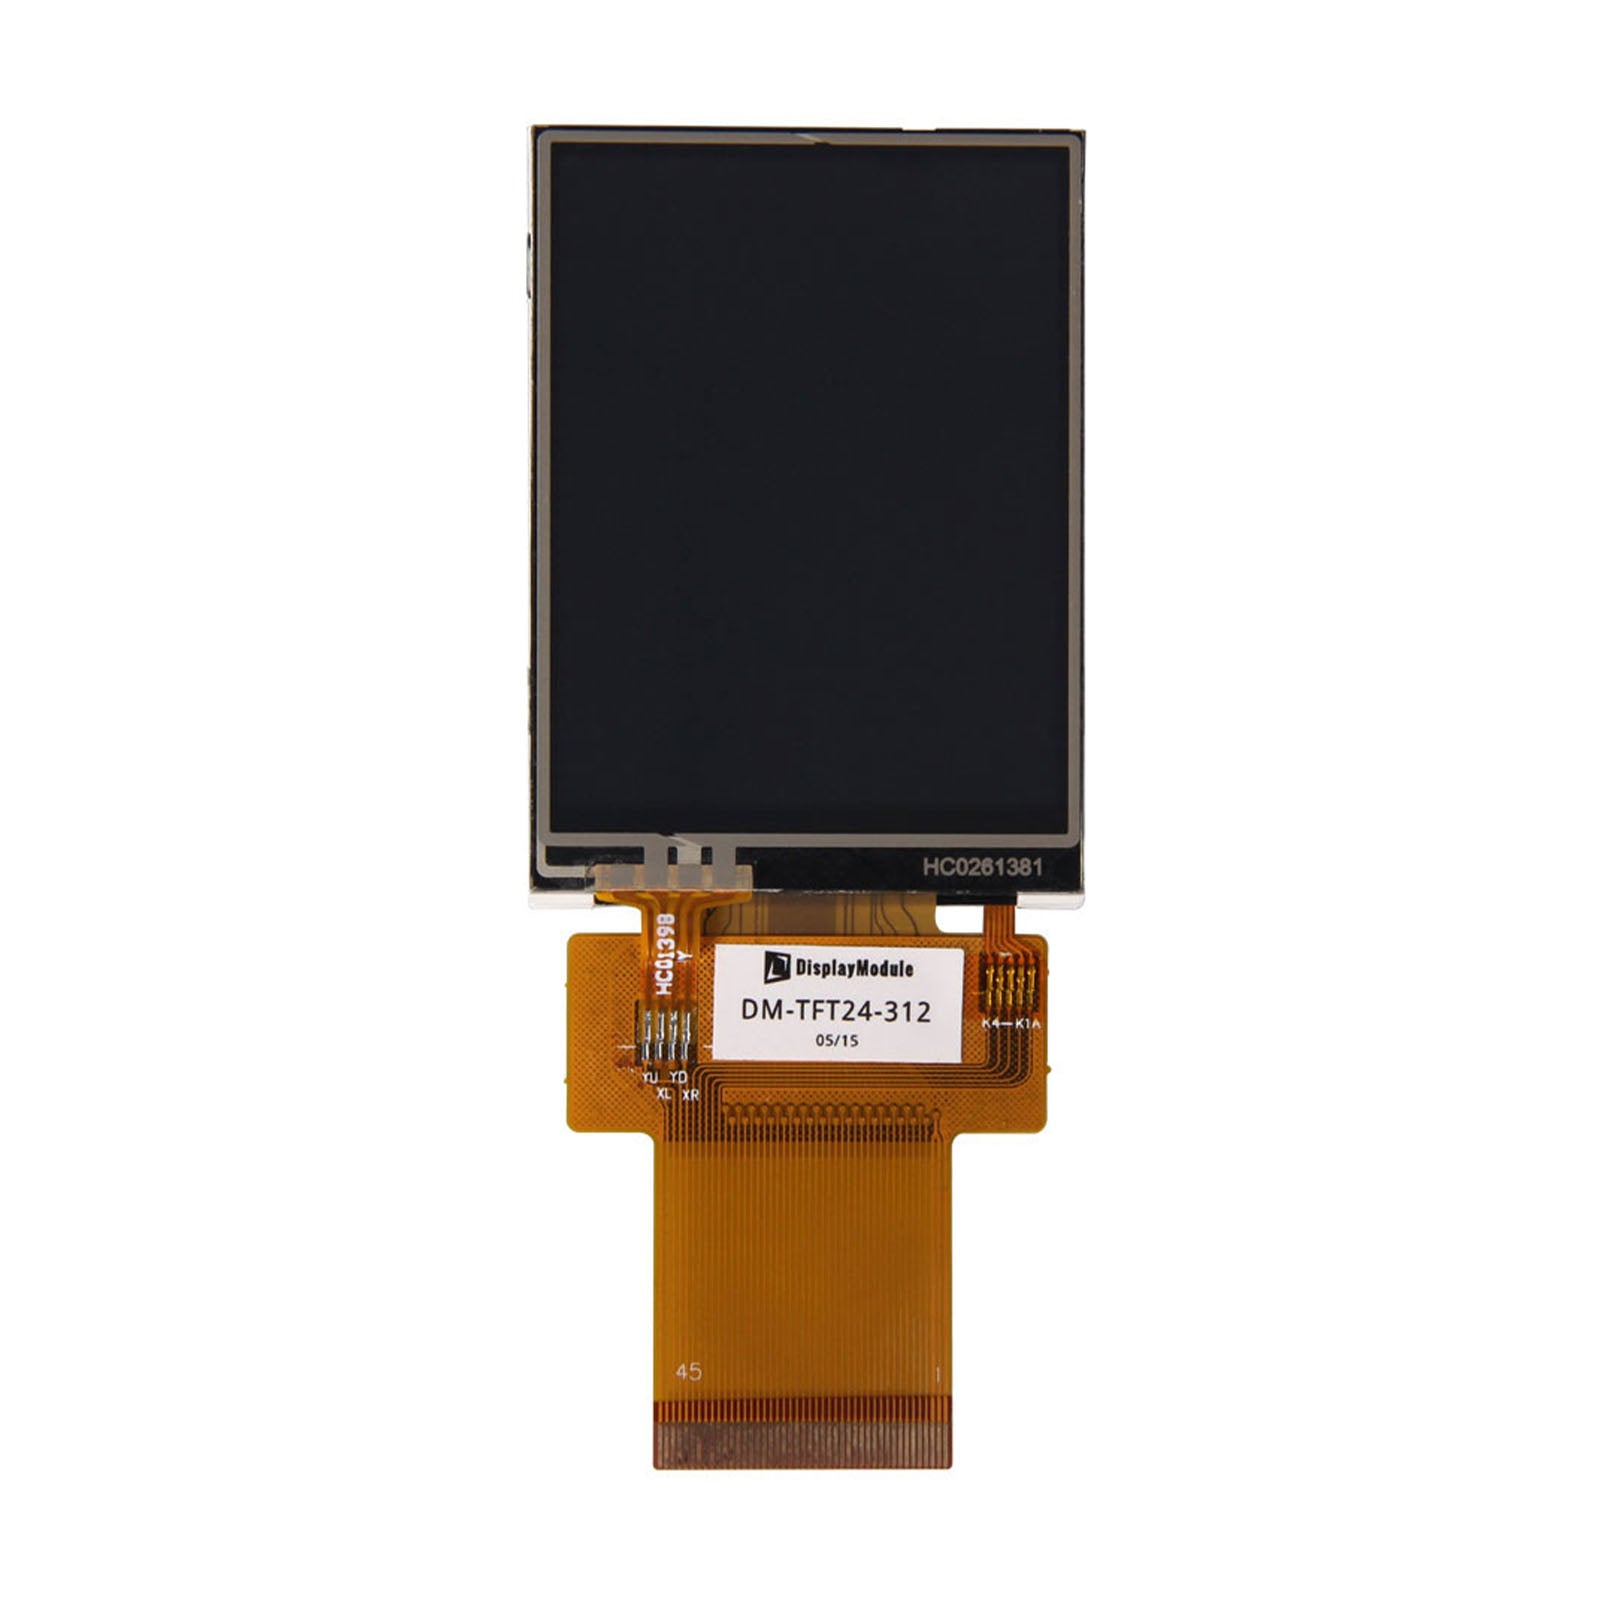 2.4 inch TFT Display Panel with 240x320 resolution and resistive touch capability, utilizing SPI, MCU, and RGB interfaces